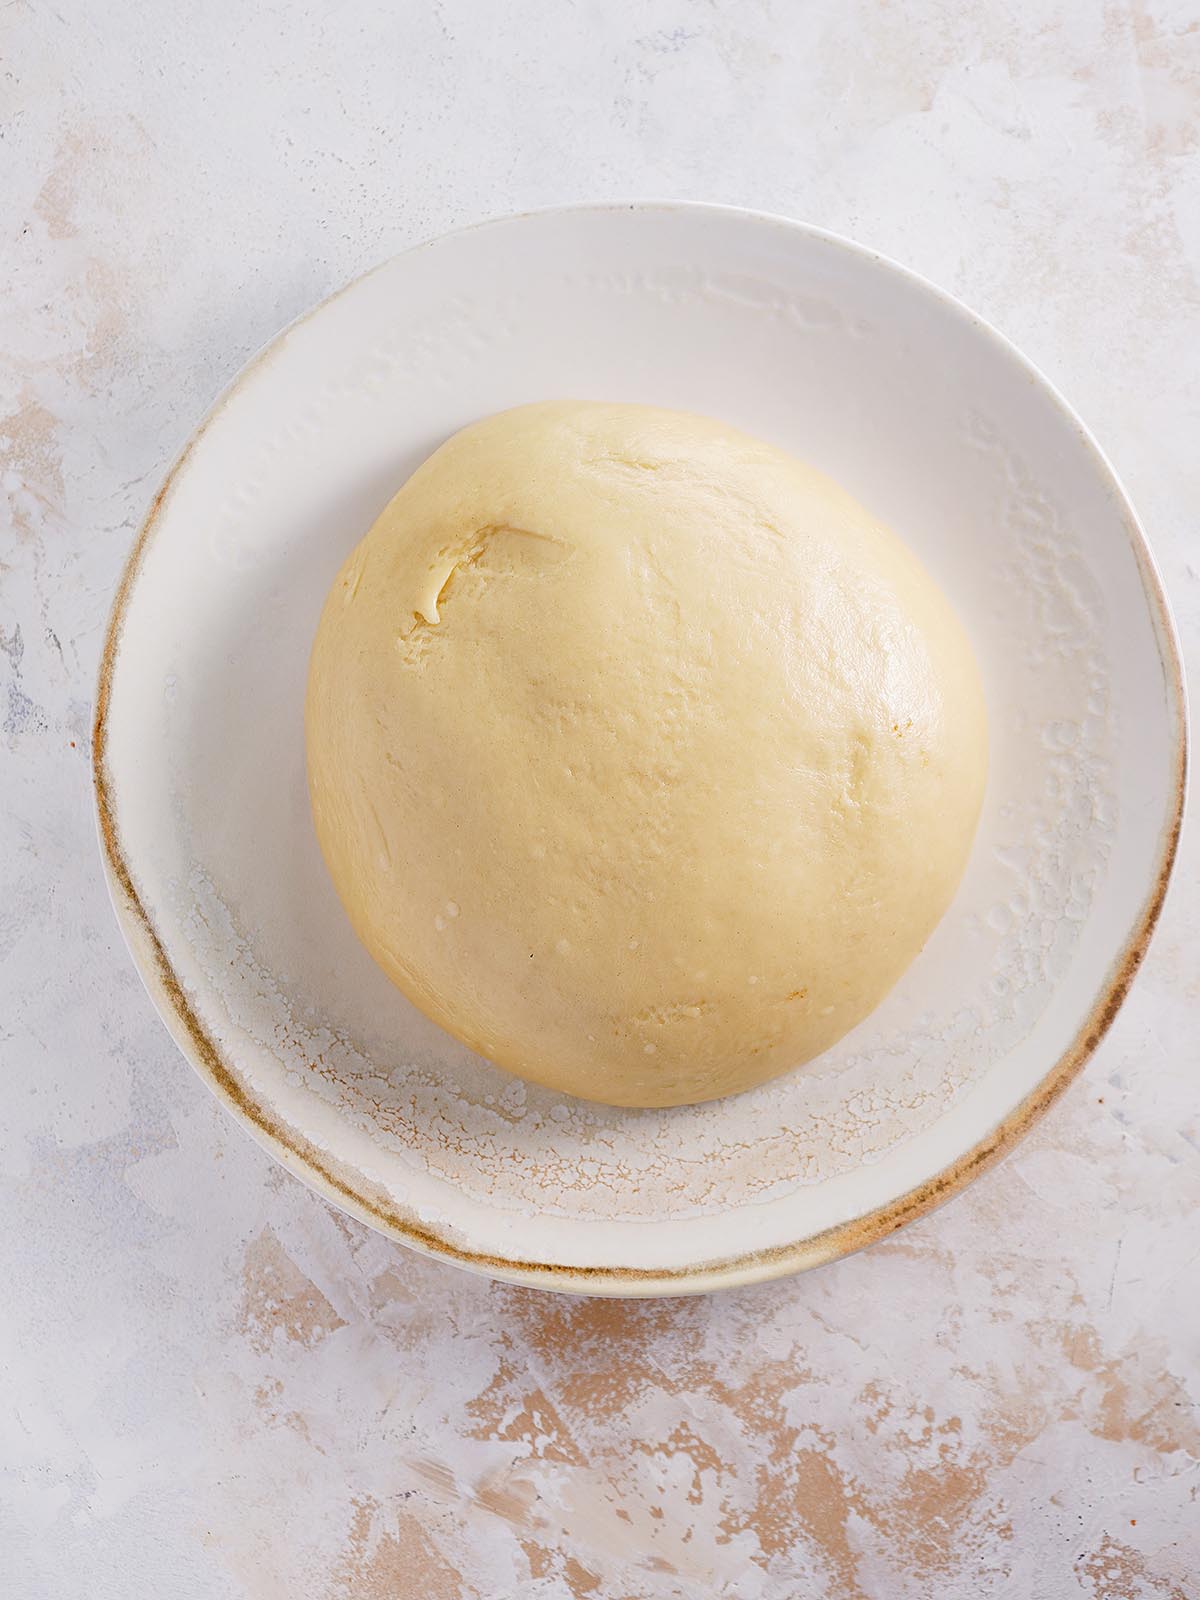 The dough in round shape inside a wide bowl.